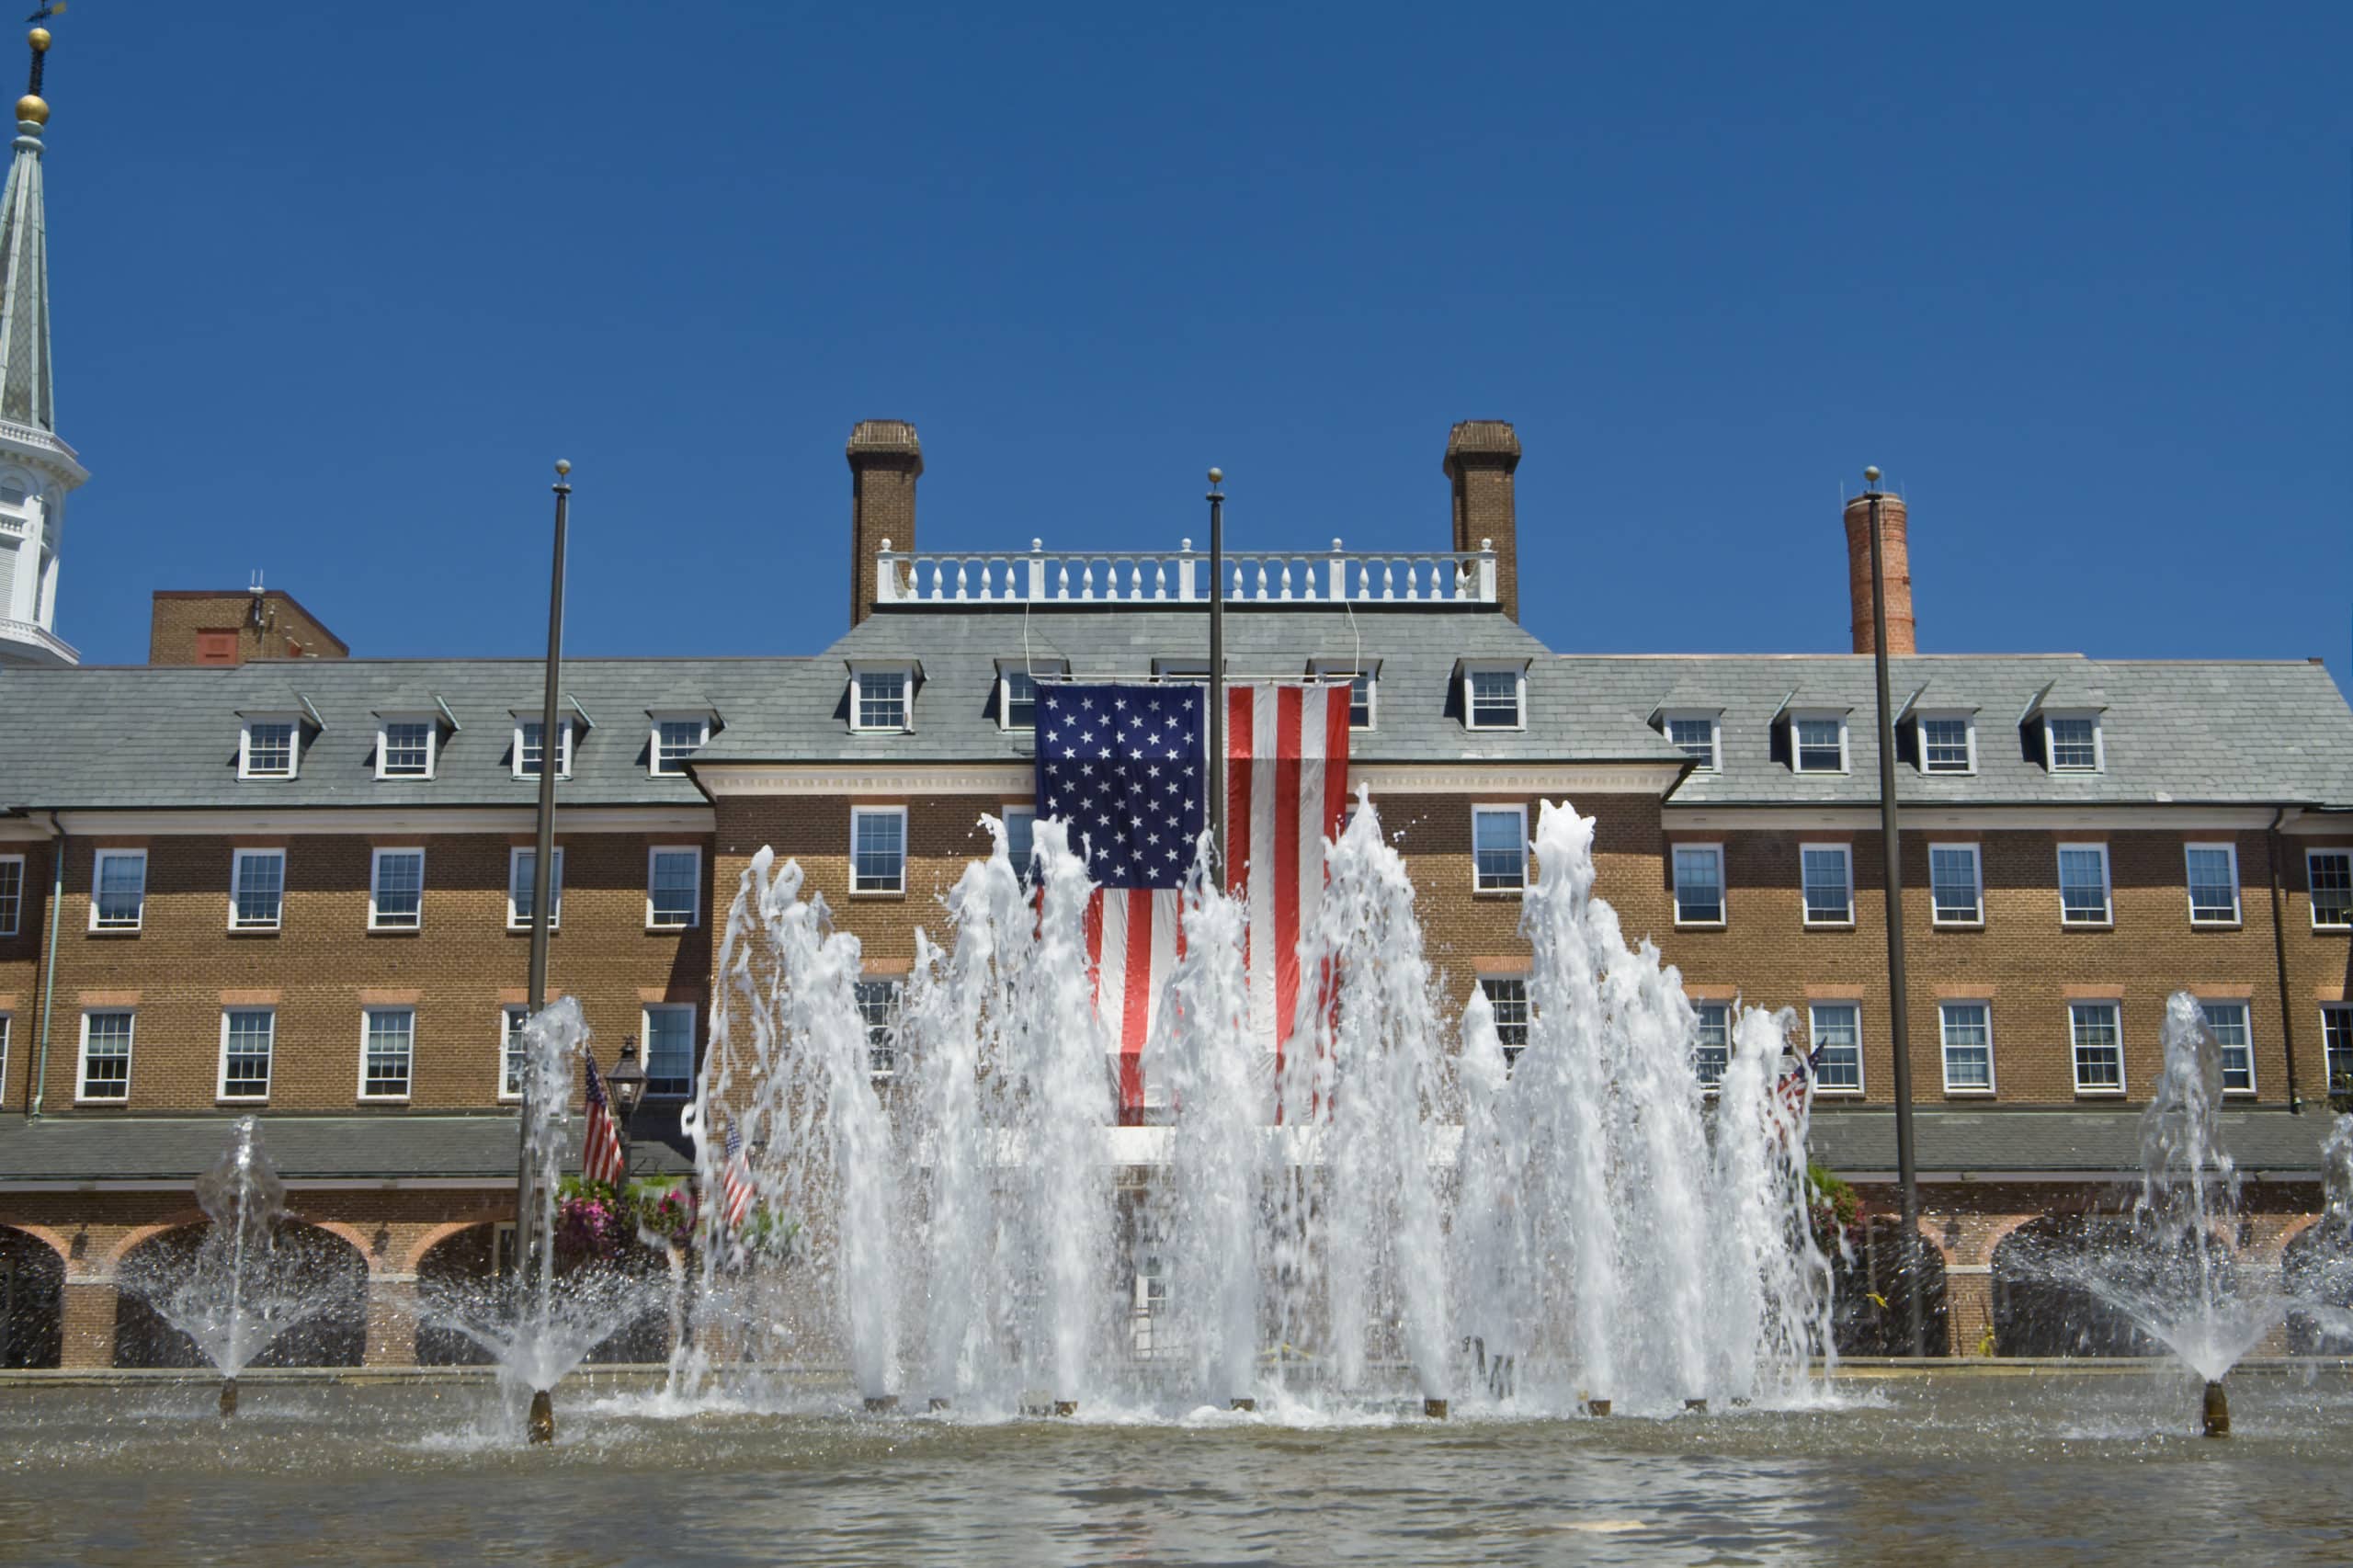 "City Hall in Old Town, Alexandria, Virginia in colonial revival style.  - See lightbox for more"